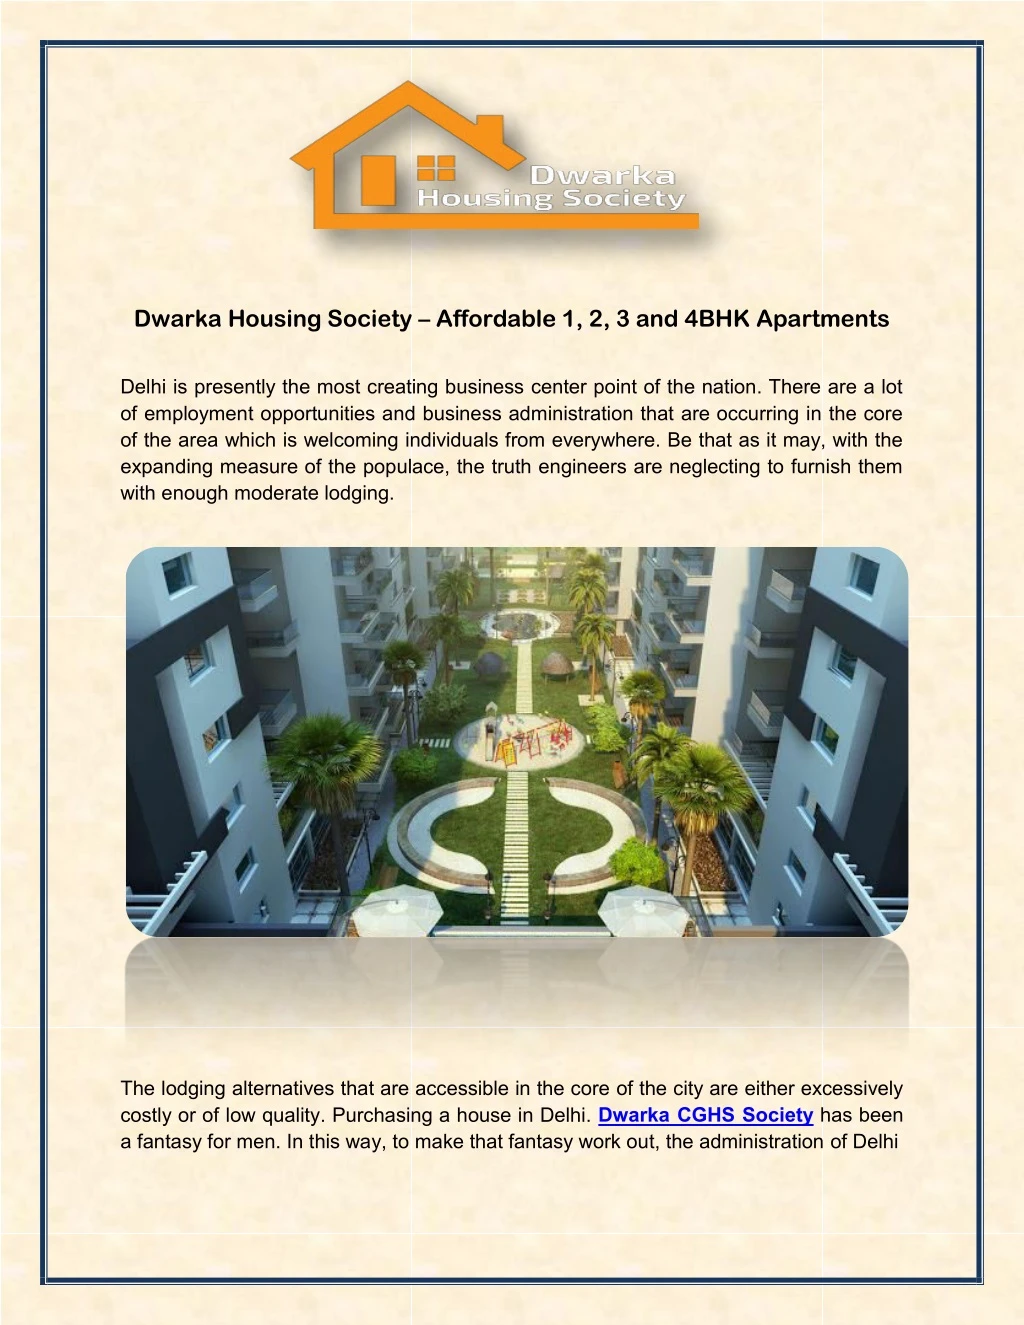 dwarka housing society affordable 1 2 3 and 4bhk